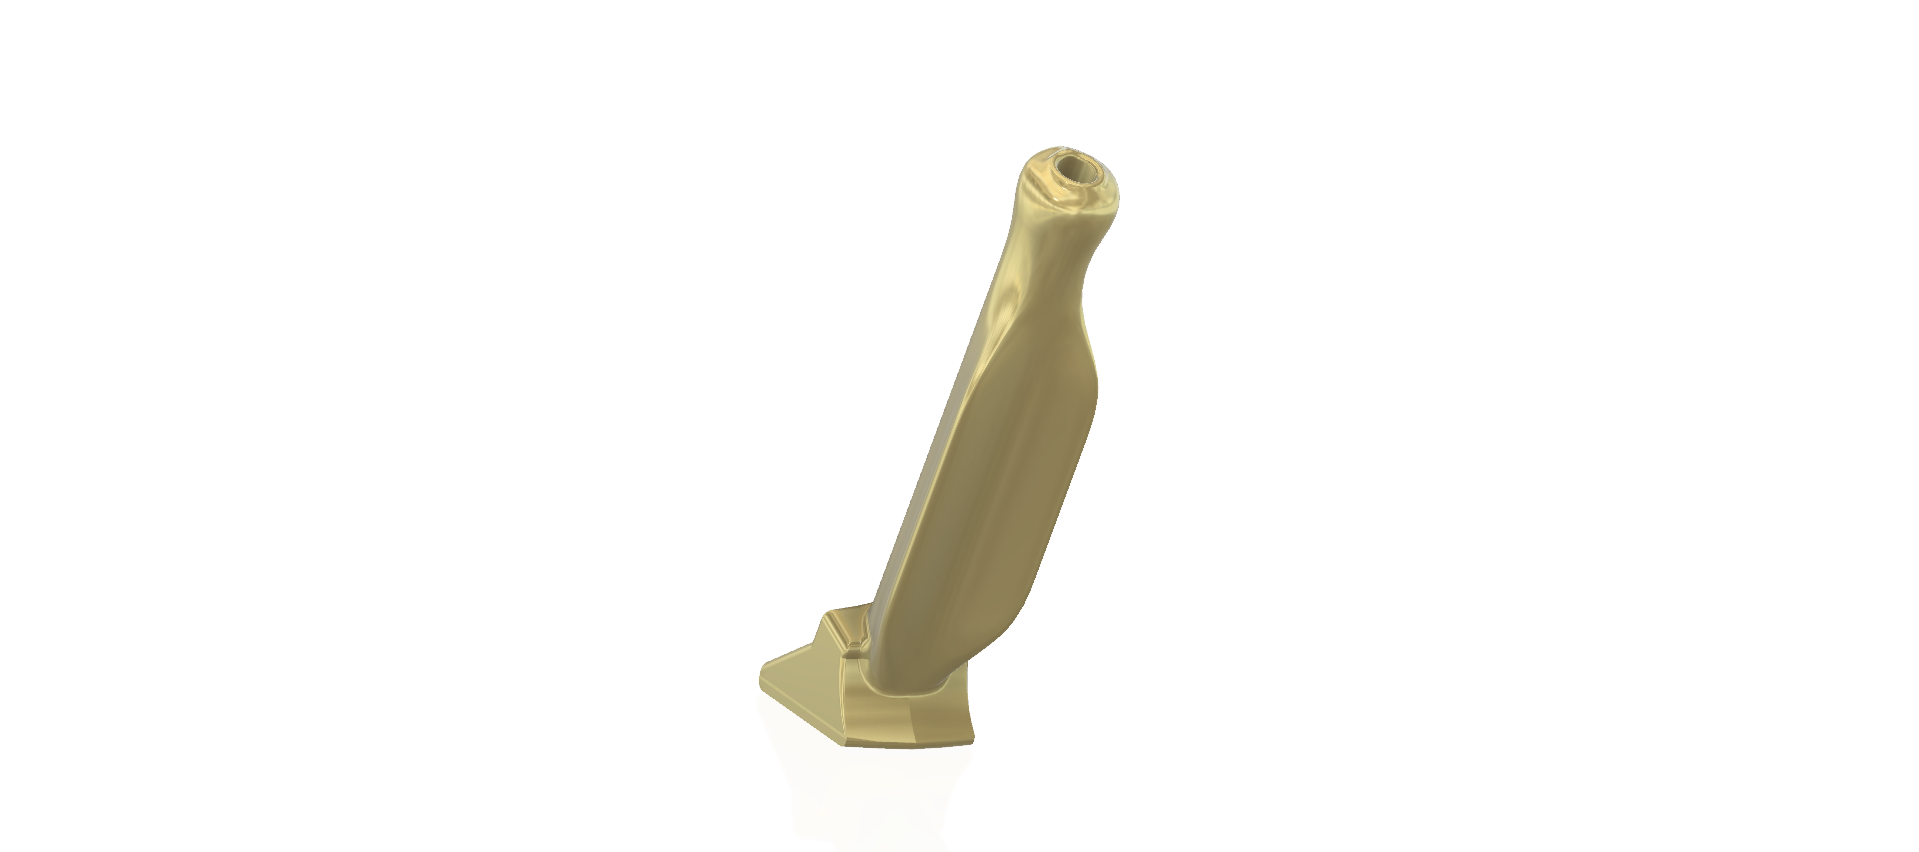 snuffer-02 v4-03.png Download STL file Portable Little Gold Vacuum Nasal Snuff Sniffer Snorter tobacco snuffer inhalation tube vts02 for 3d-print and cnc • 3D printing design, Dzusto